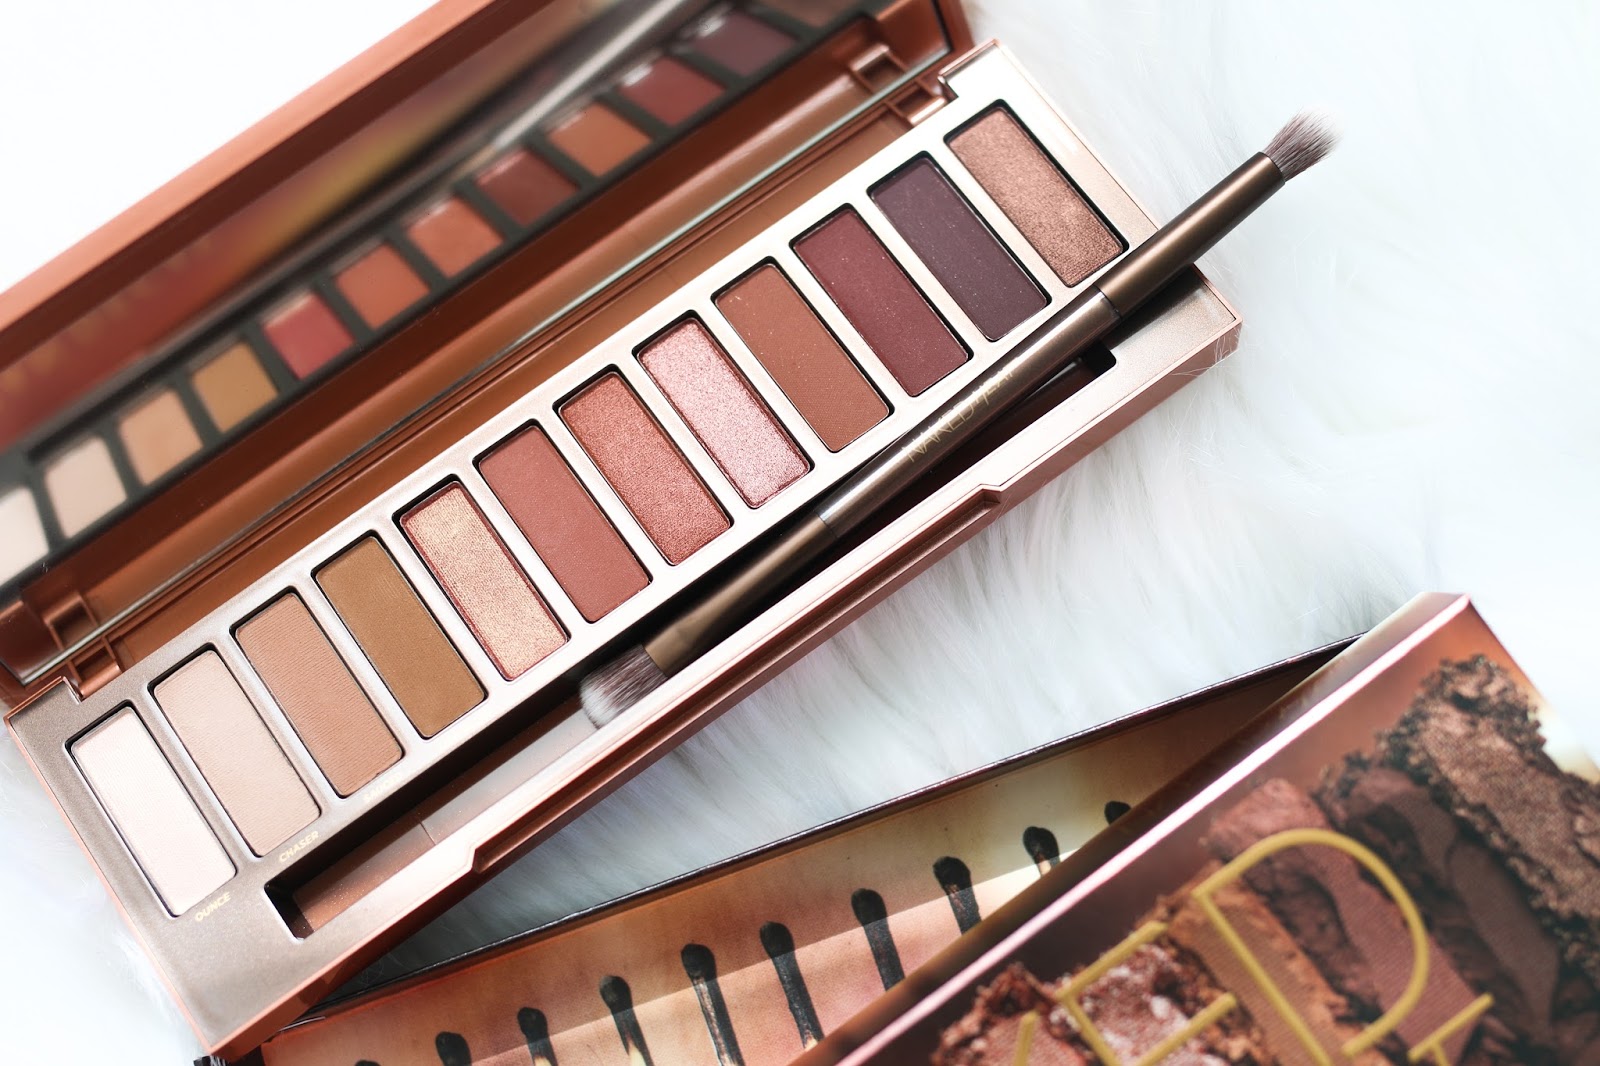 Urban Decay Naked Heat Swatches - Swatches on Pale Skin